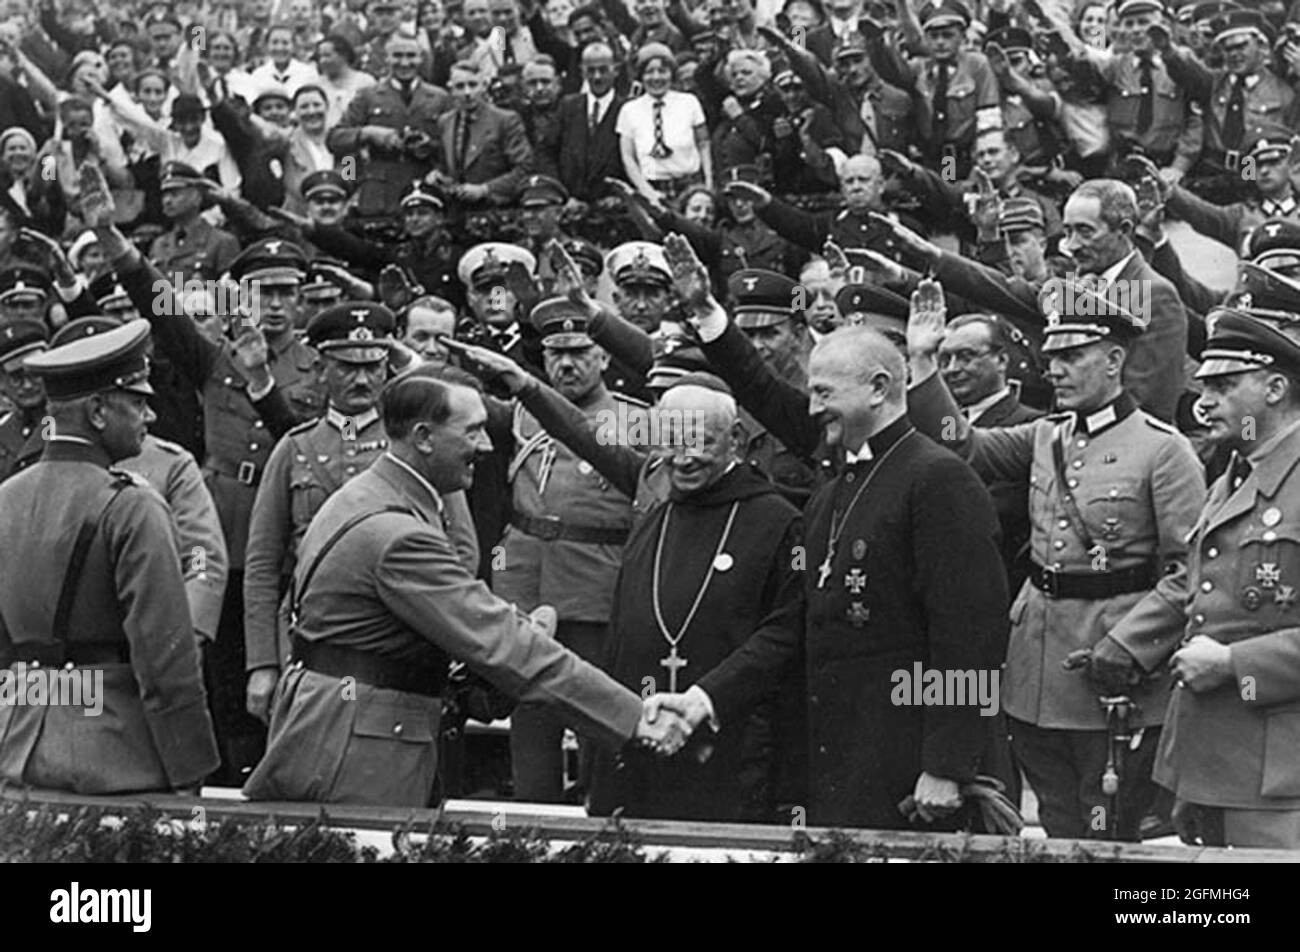 Hitler shaking hands with Catholic dignitaries in Germany in the 1930s Stock Photo